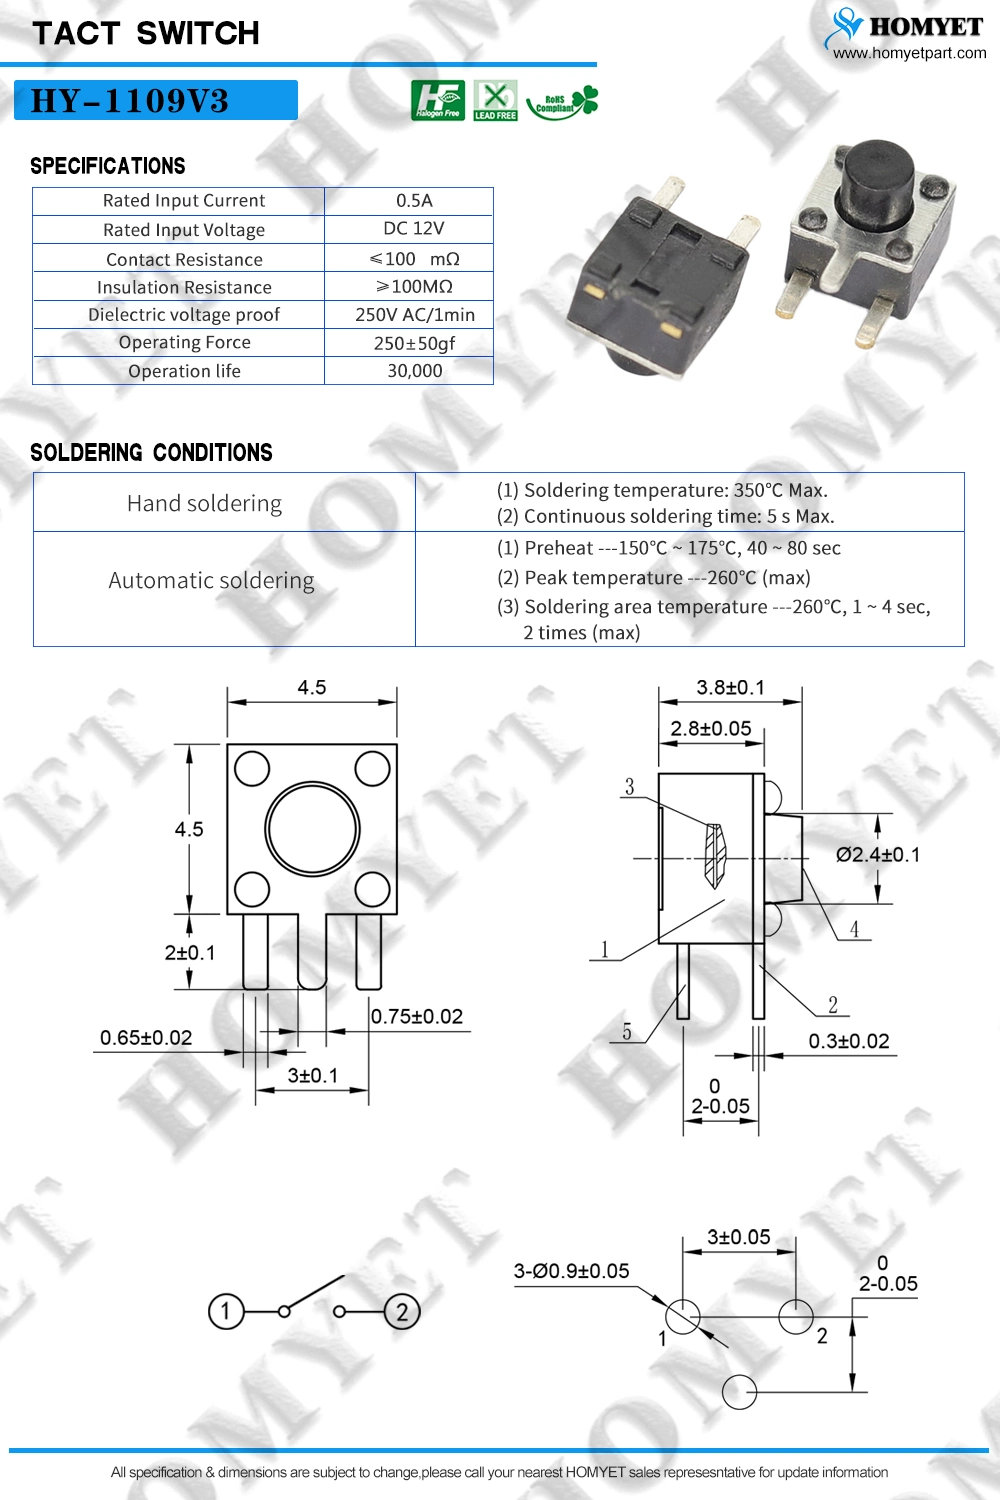 Best Seller Small and Thin Tact Switch 4.5*4.5mm Vertical Side Push Micro Switch/Contact Switch/DIP Tact Switch"